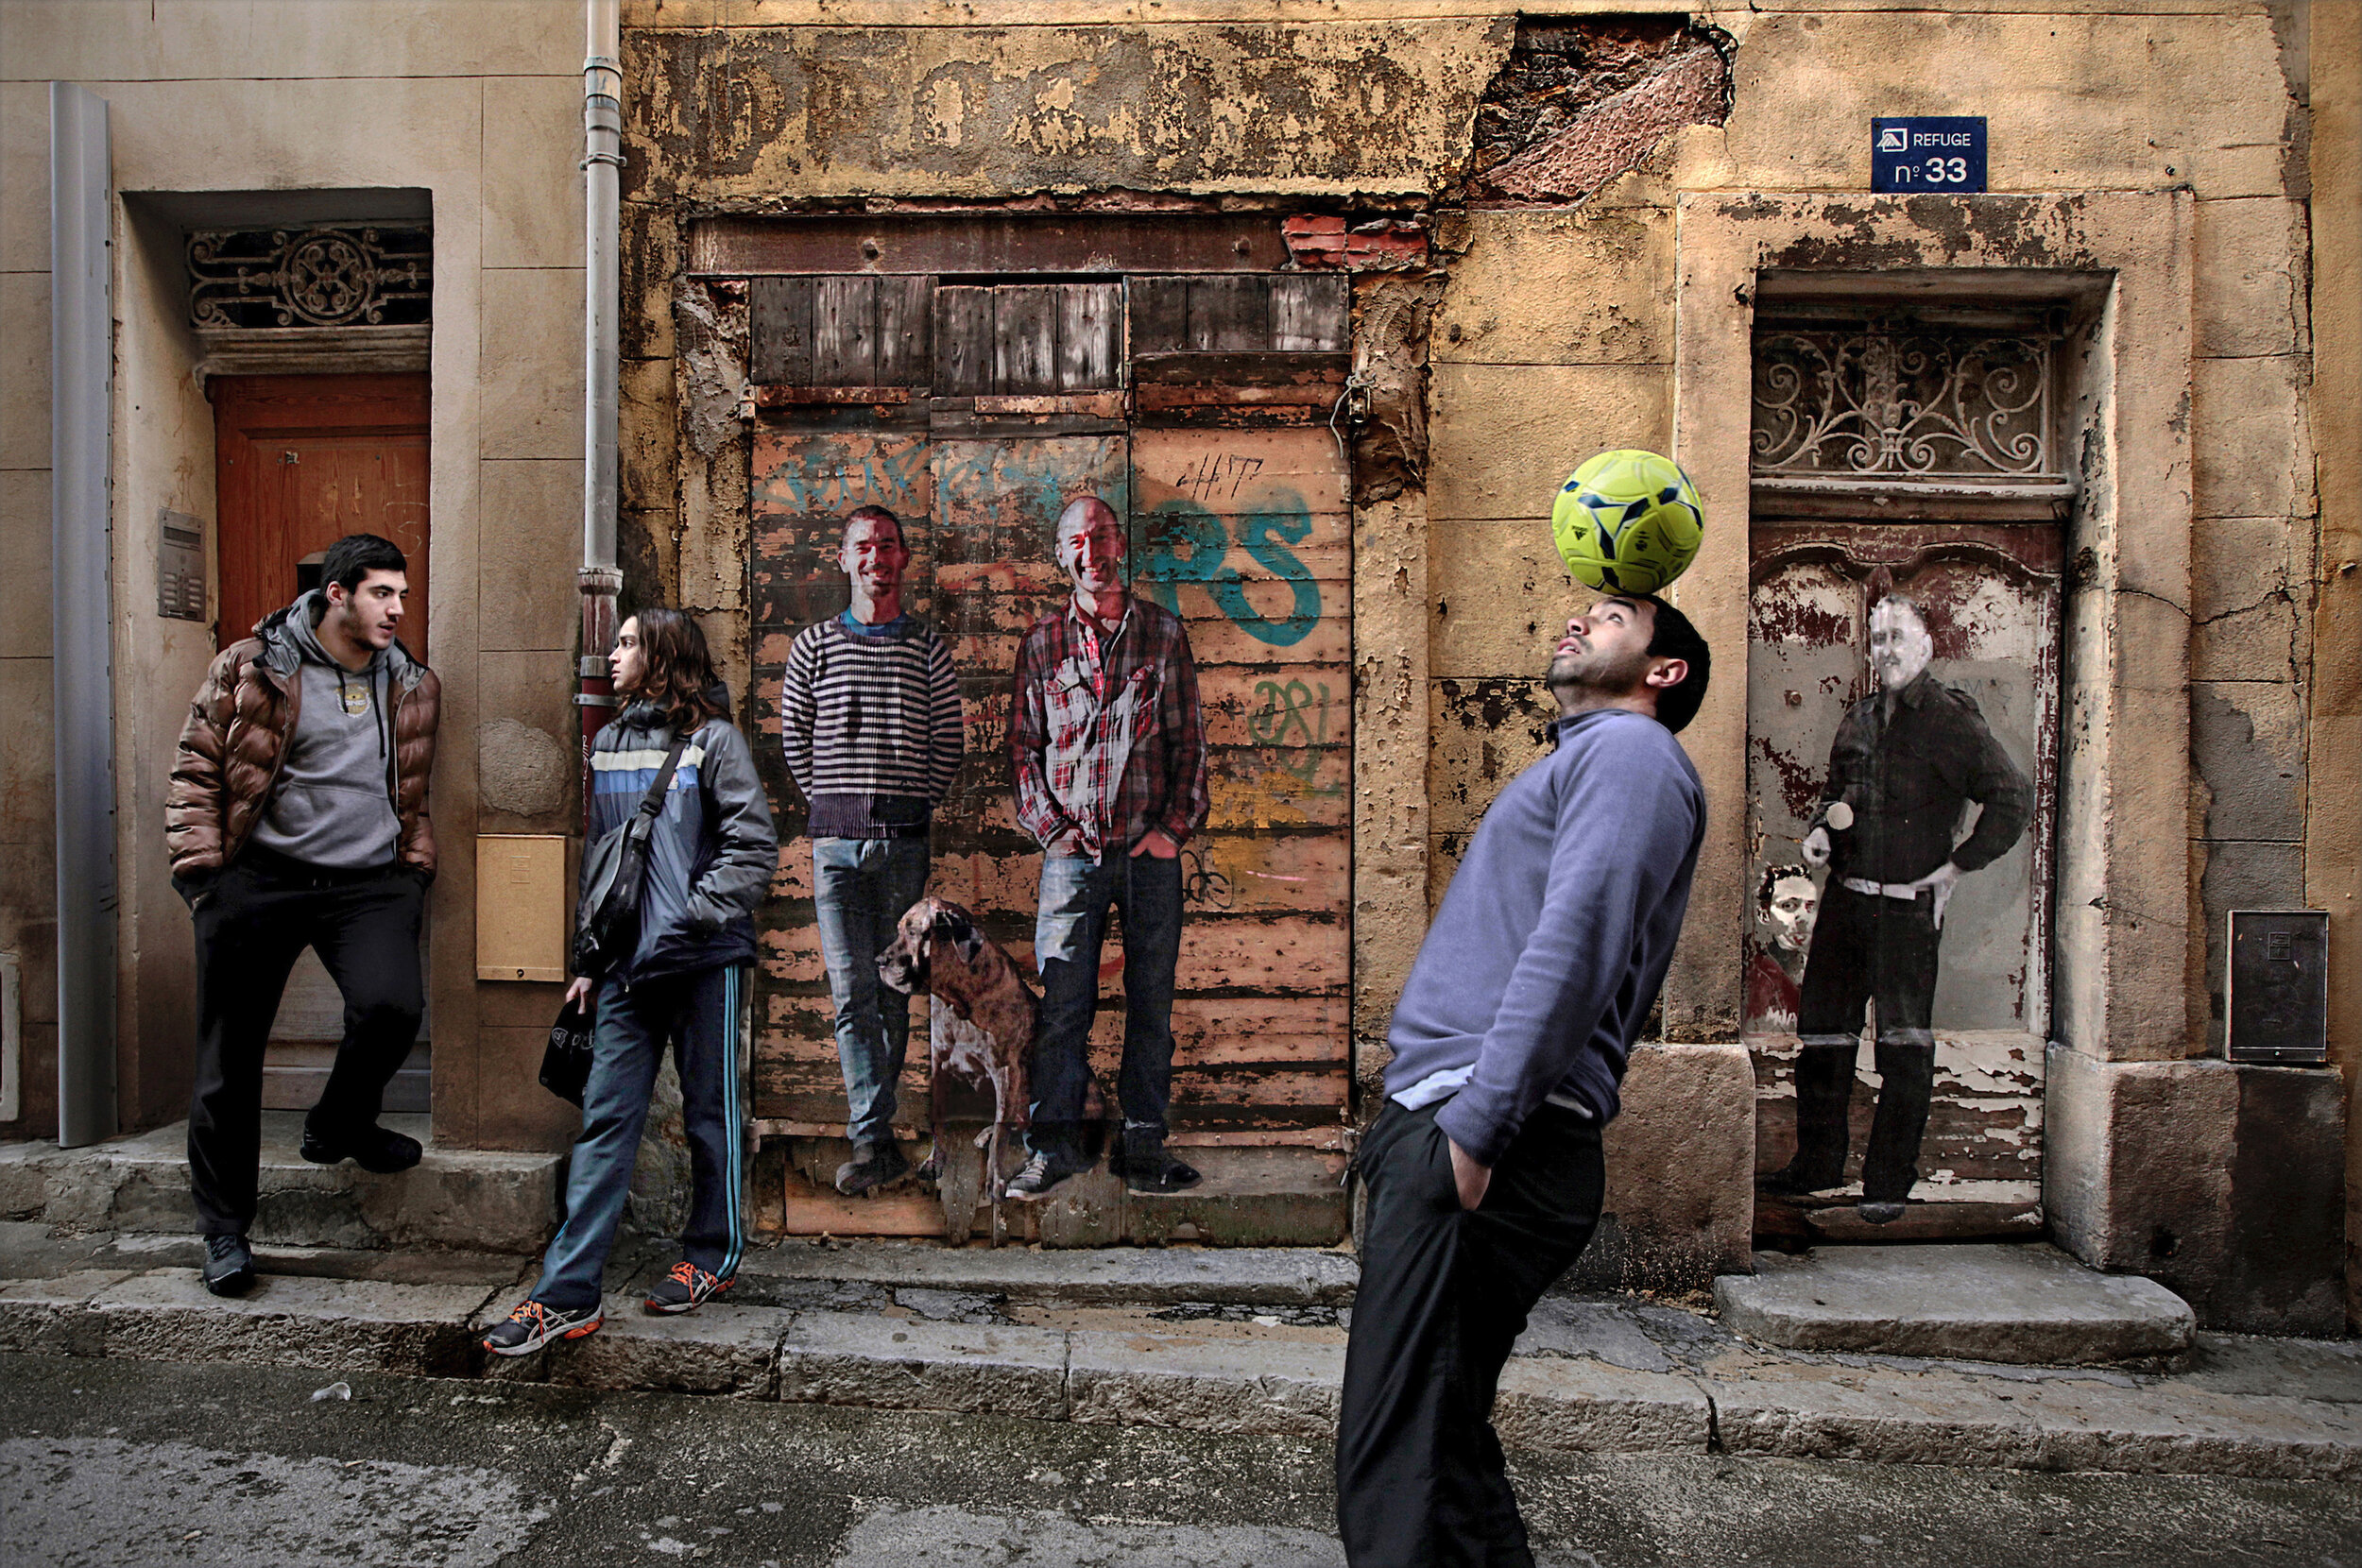   France. Marseille. 2013. A young man tries to impress with his soccer skills on a street in Le Panier district. Le Panier, the oldest part of Marseille, is where the Greeks first settled and founded the city of Massalia some 2600 years ago. Since t